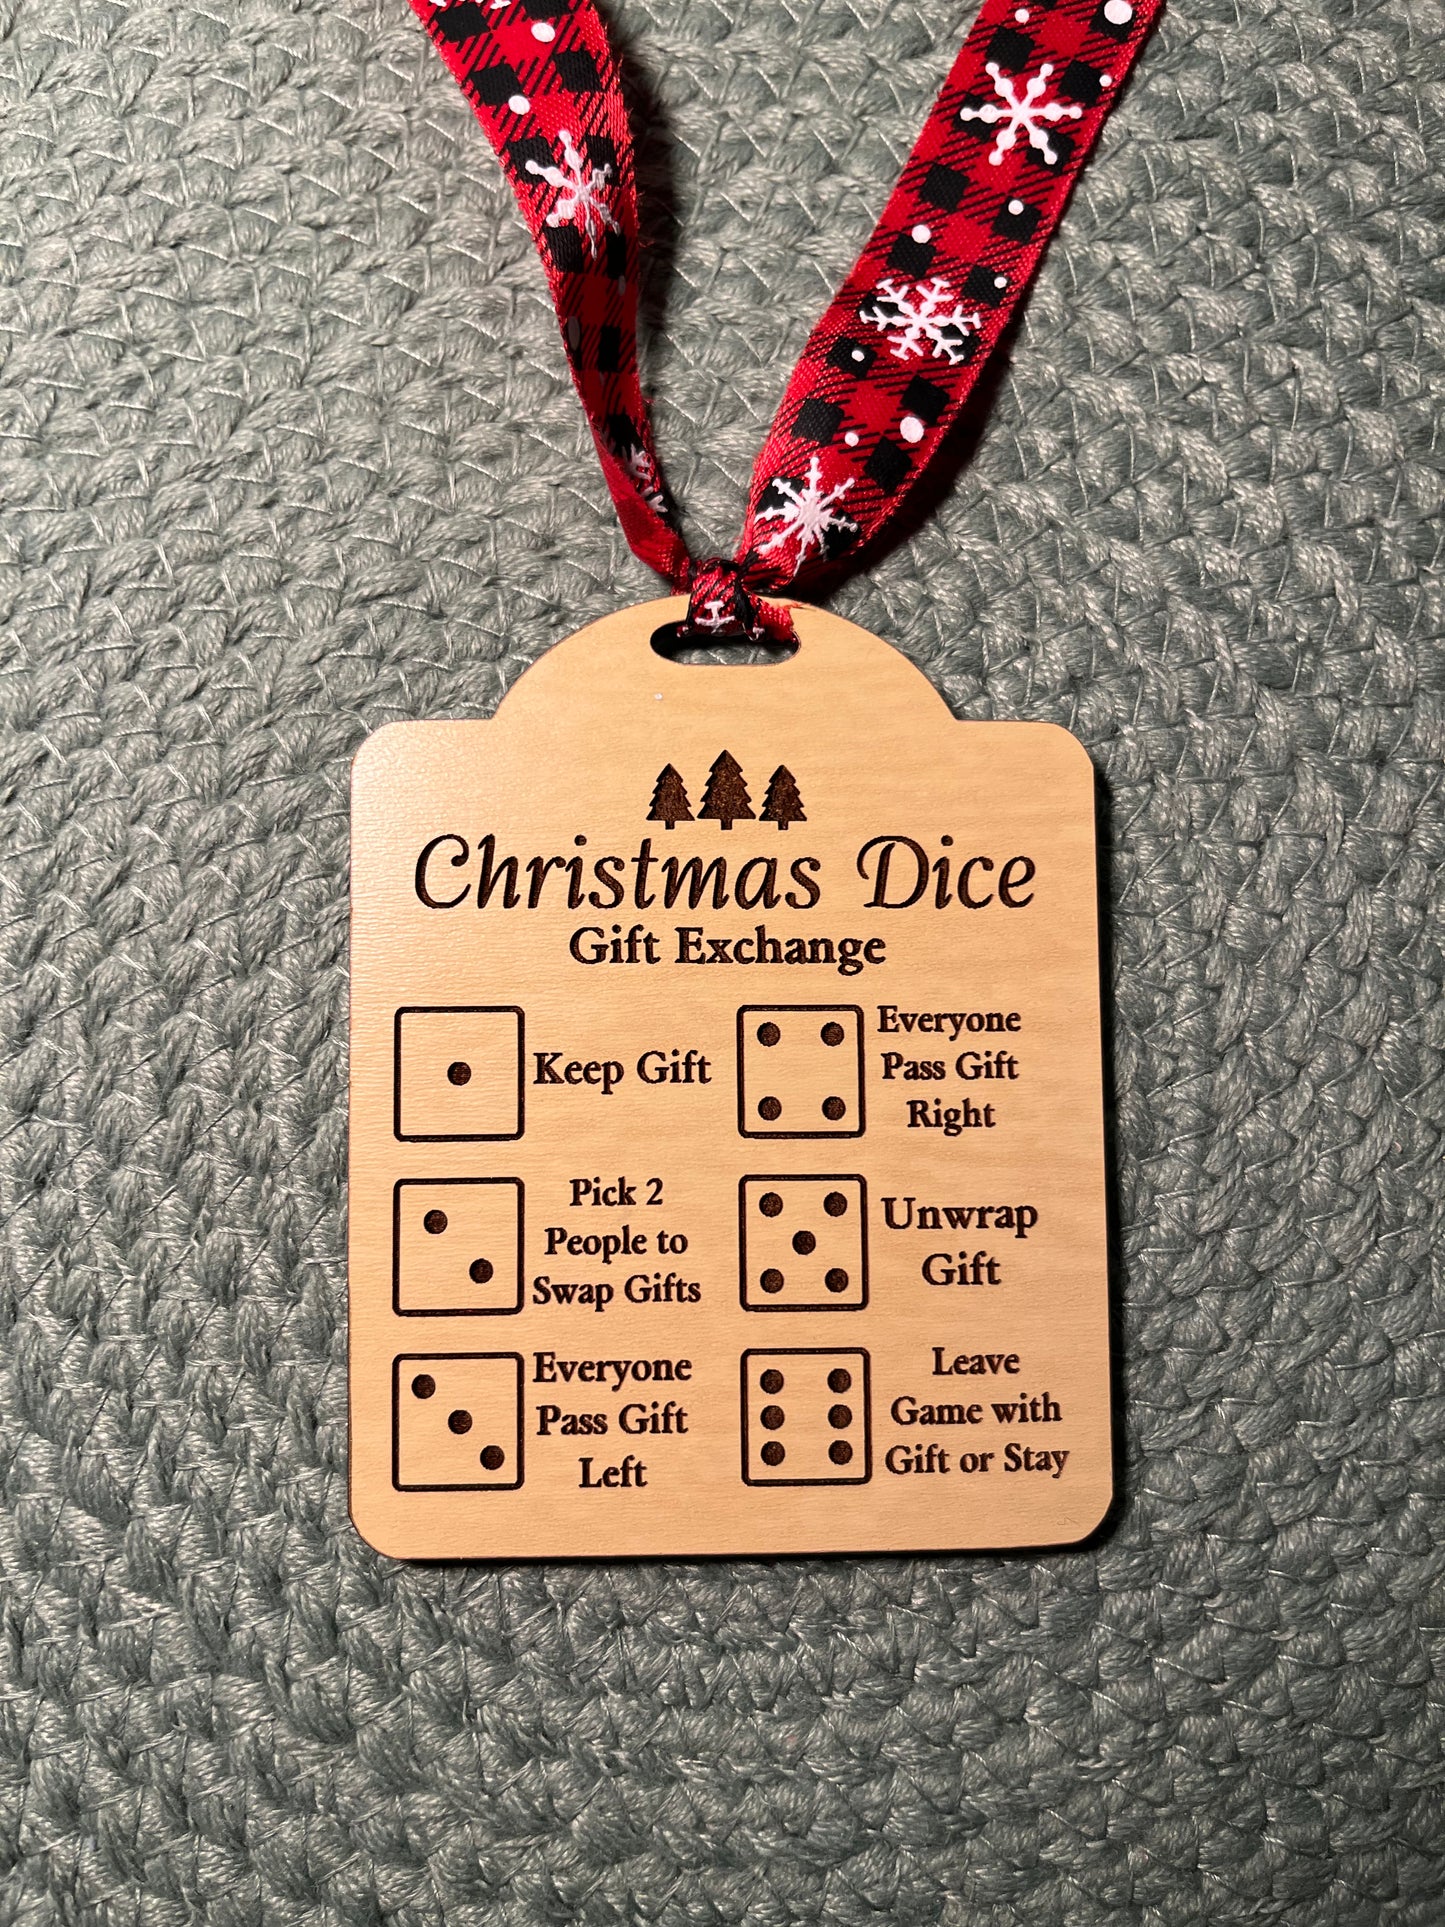 Christmas dice game instructions